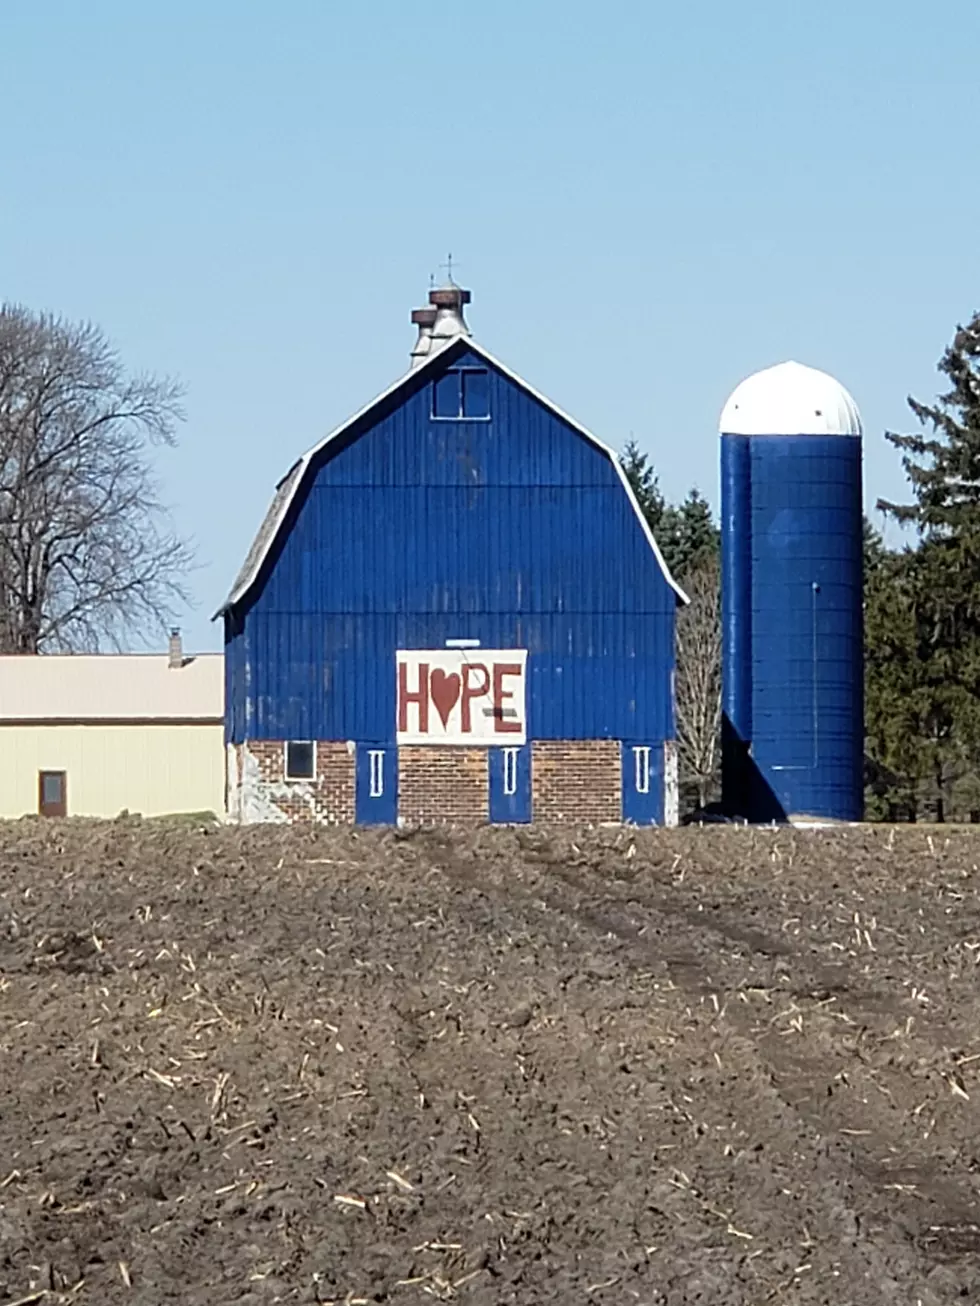 One Rice County Barn Is Inspiring Thousands Of Drivers A Day